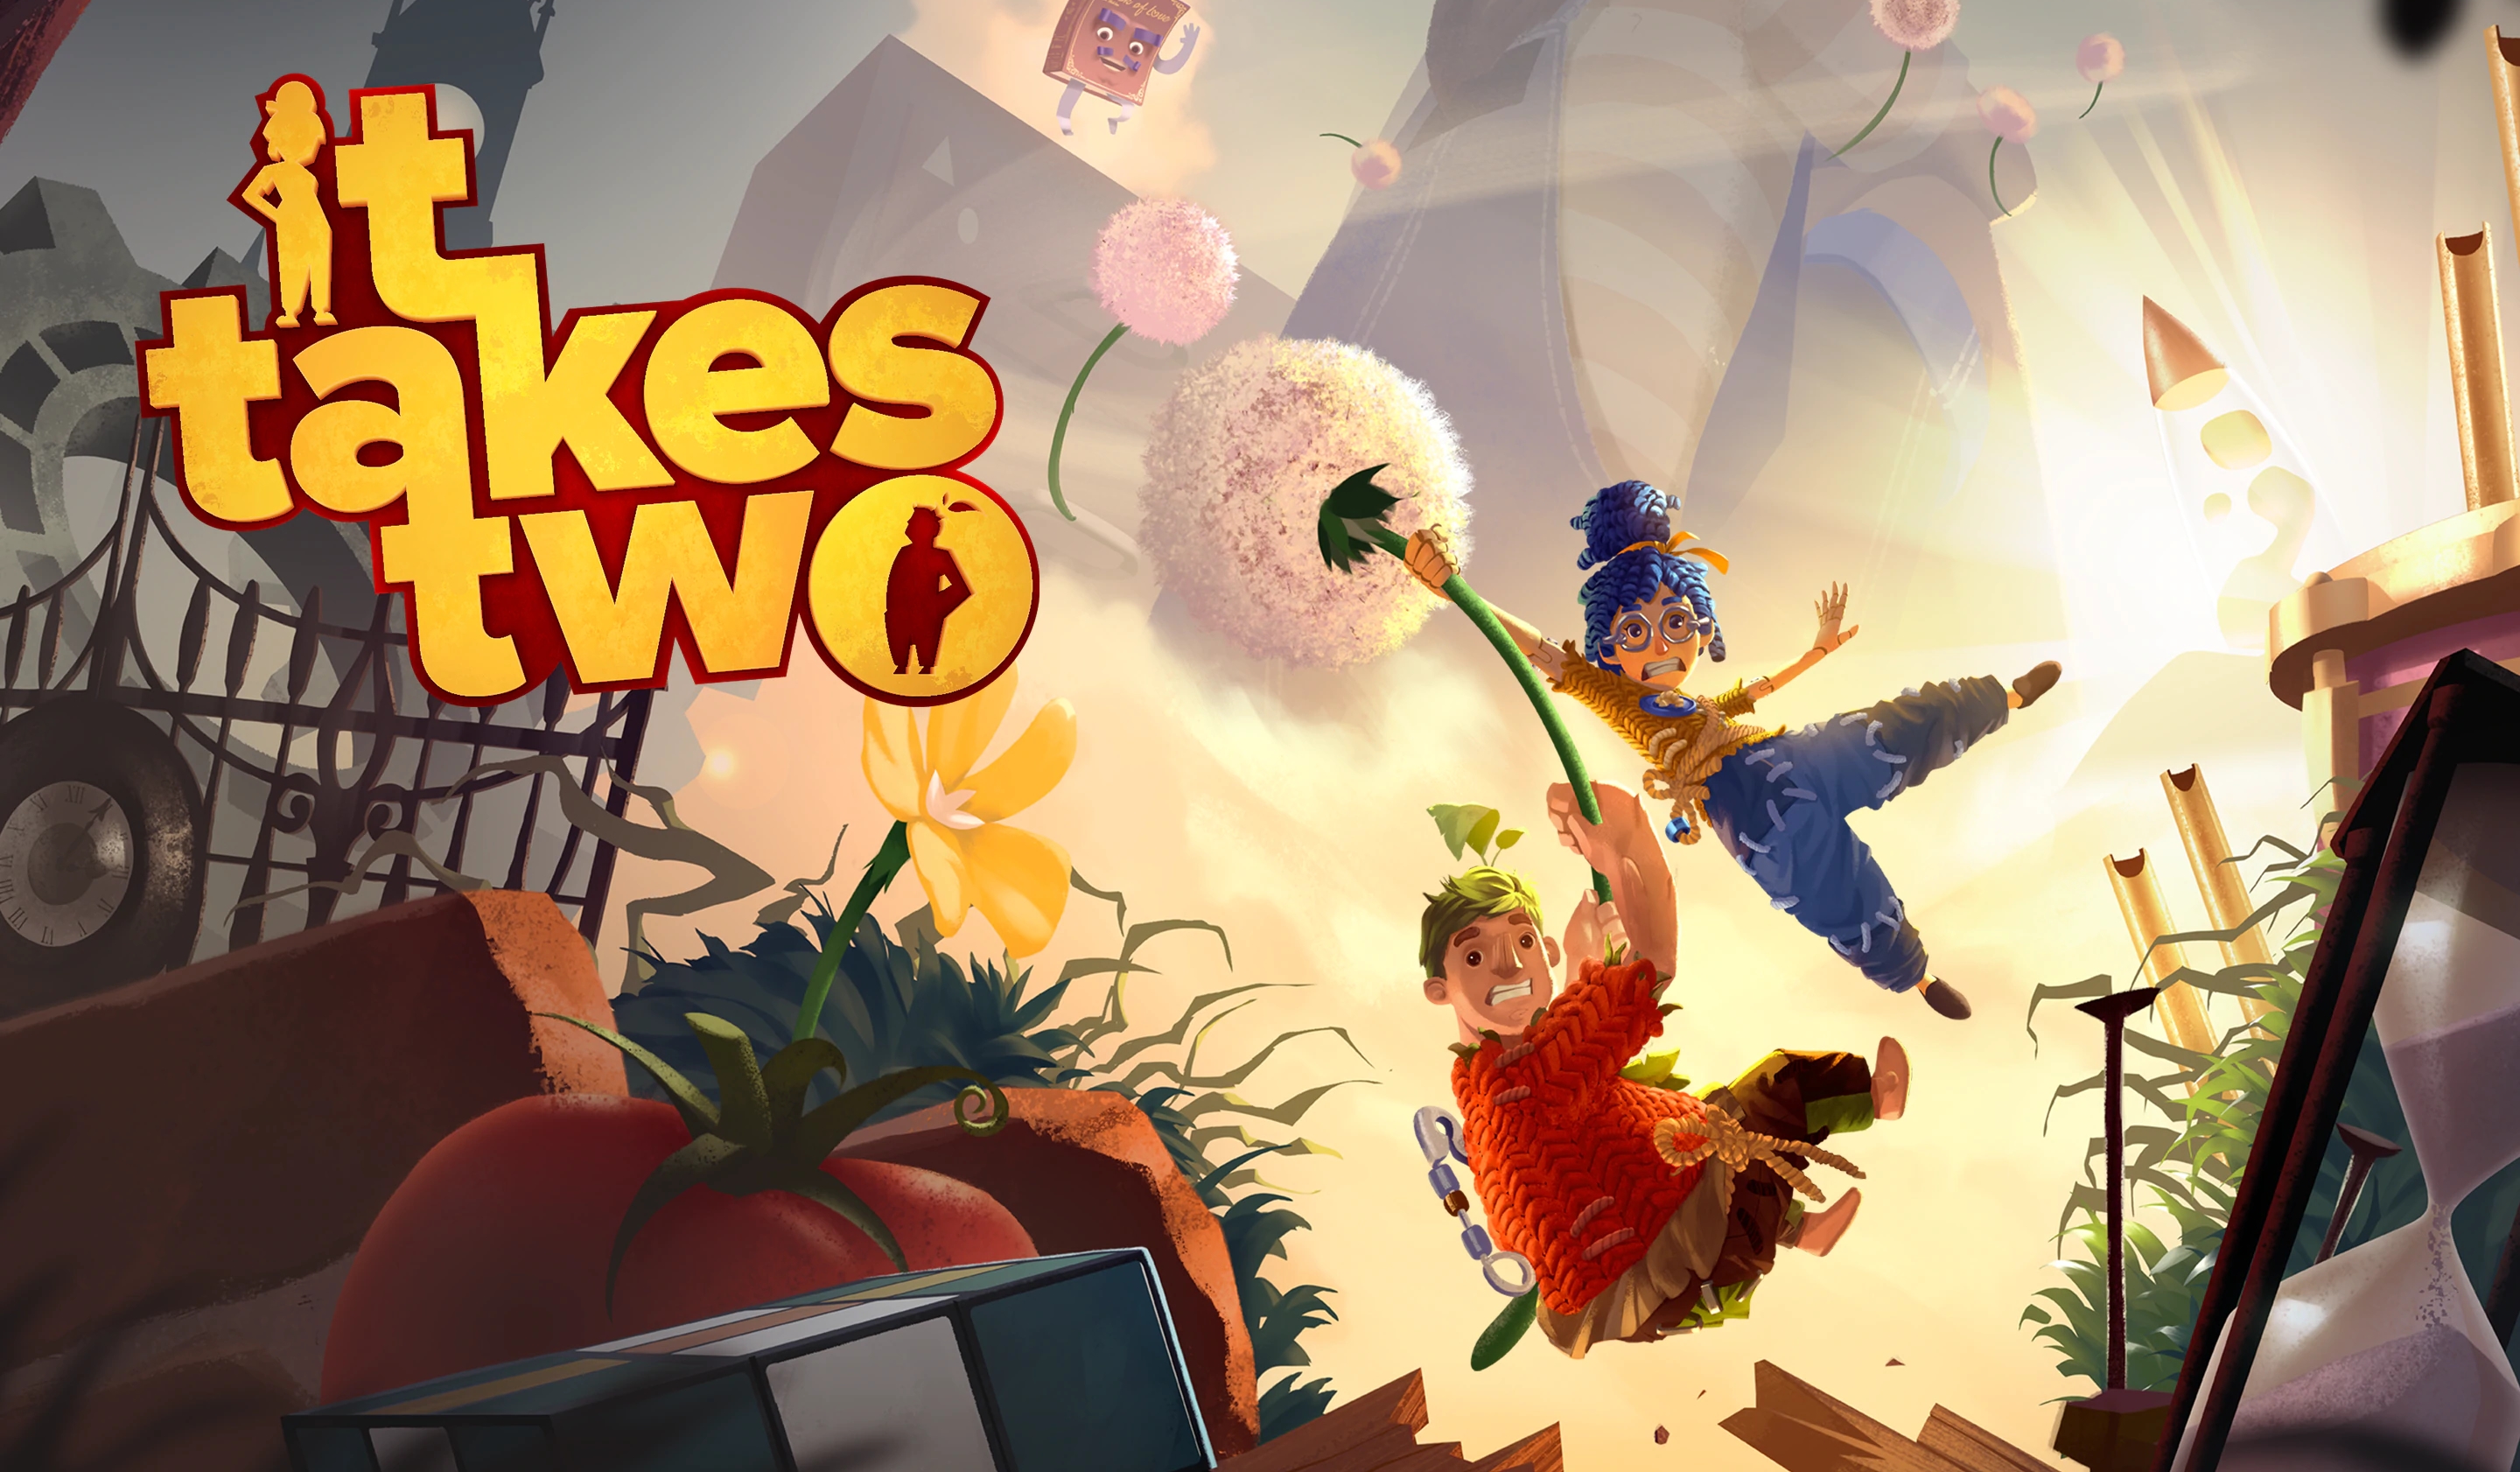 The home 2 games. It takes two игра. Take two игра. Игра it takes two ps4. It takes two ps4 русская версия.